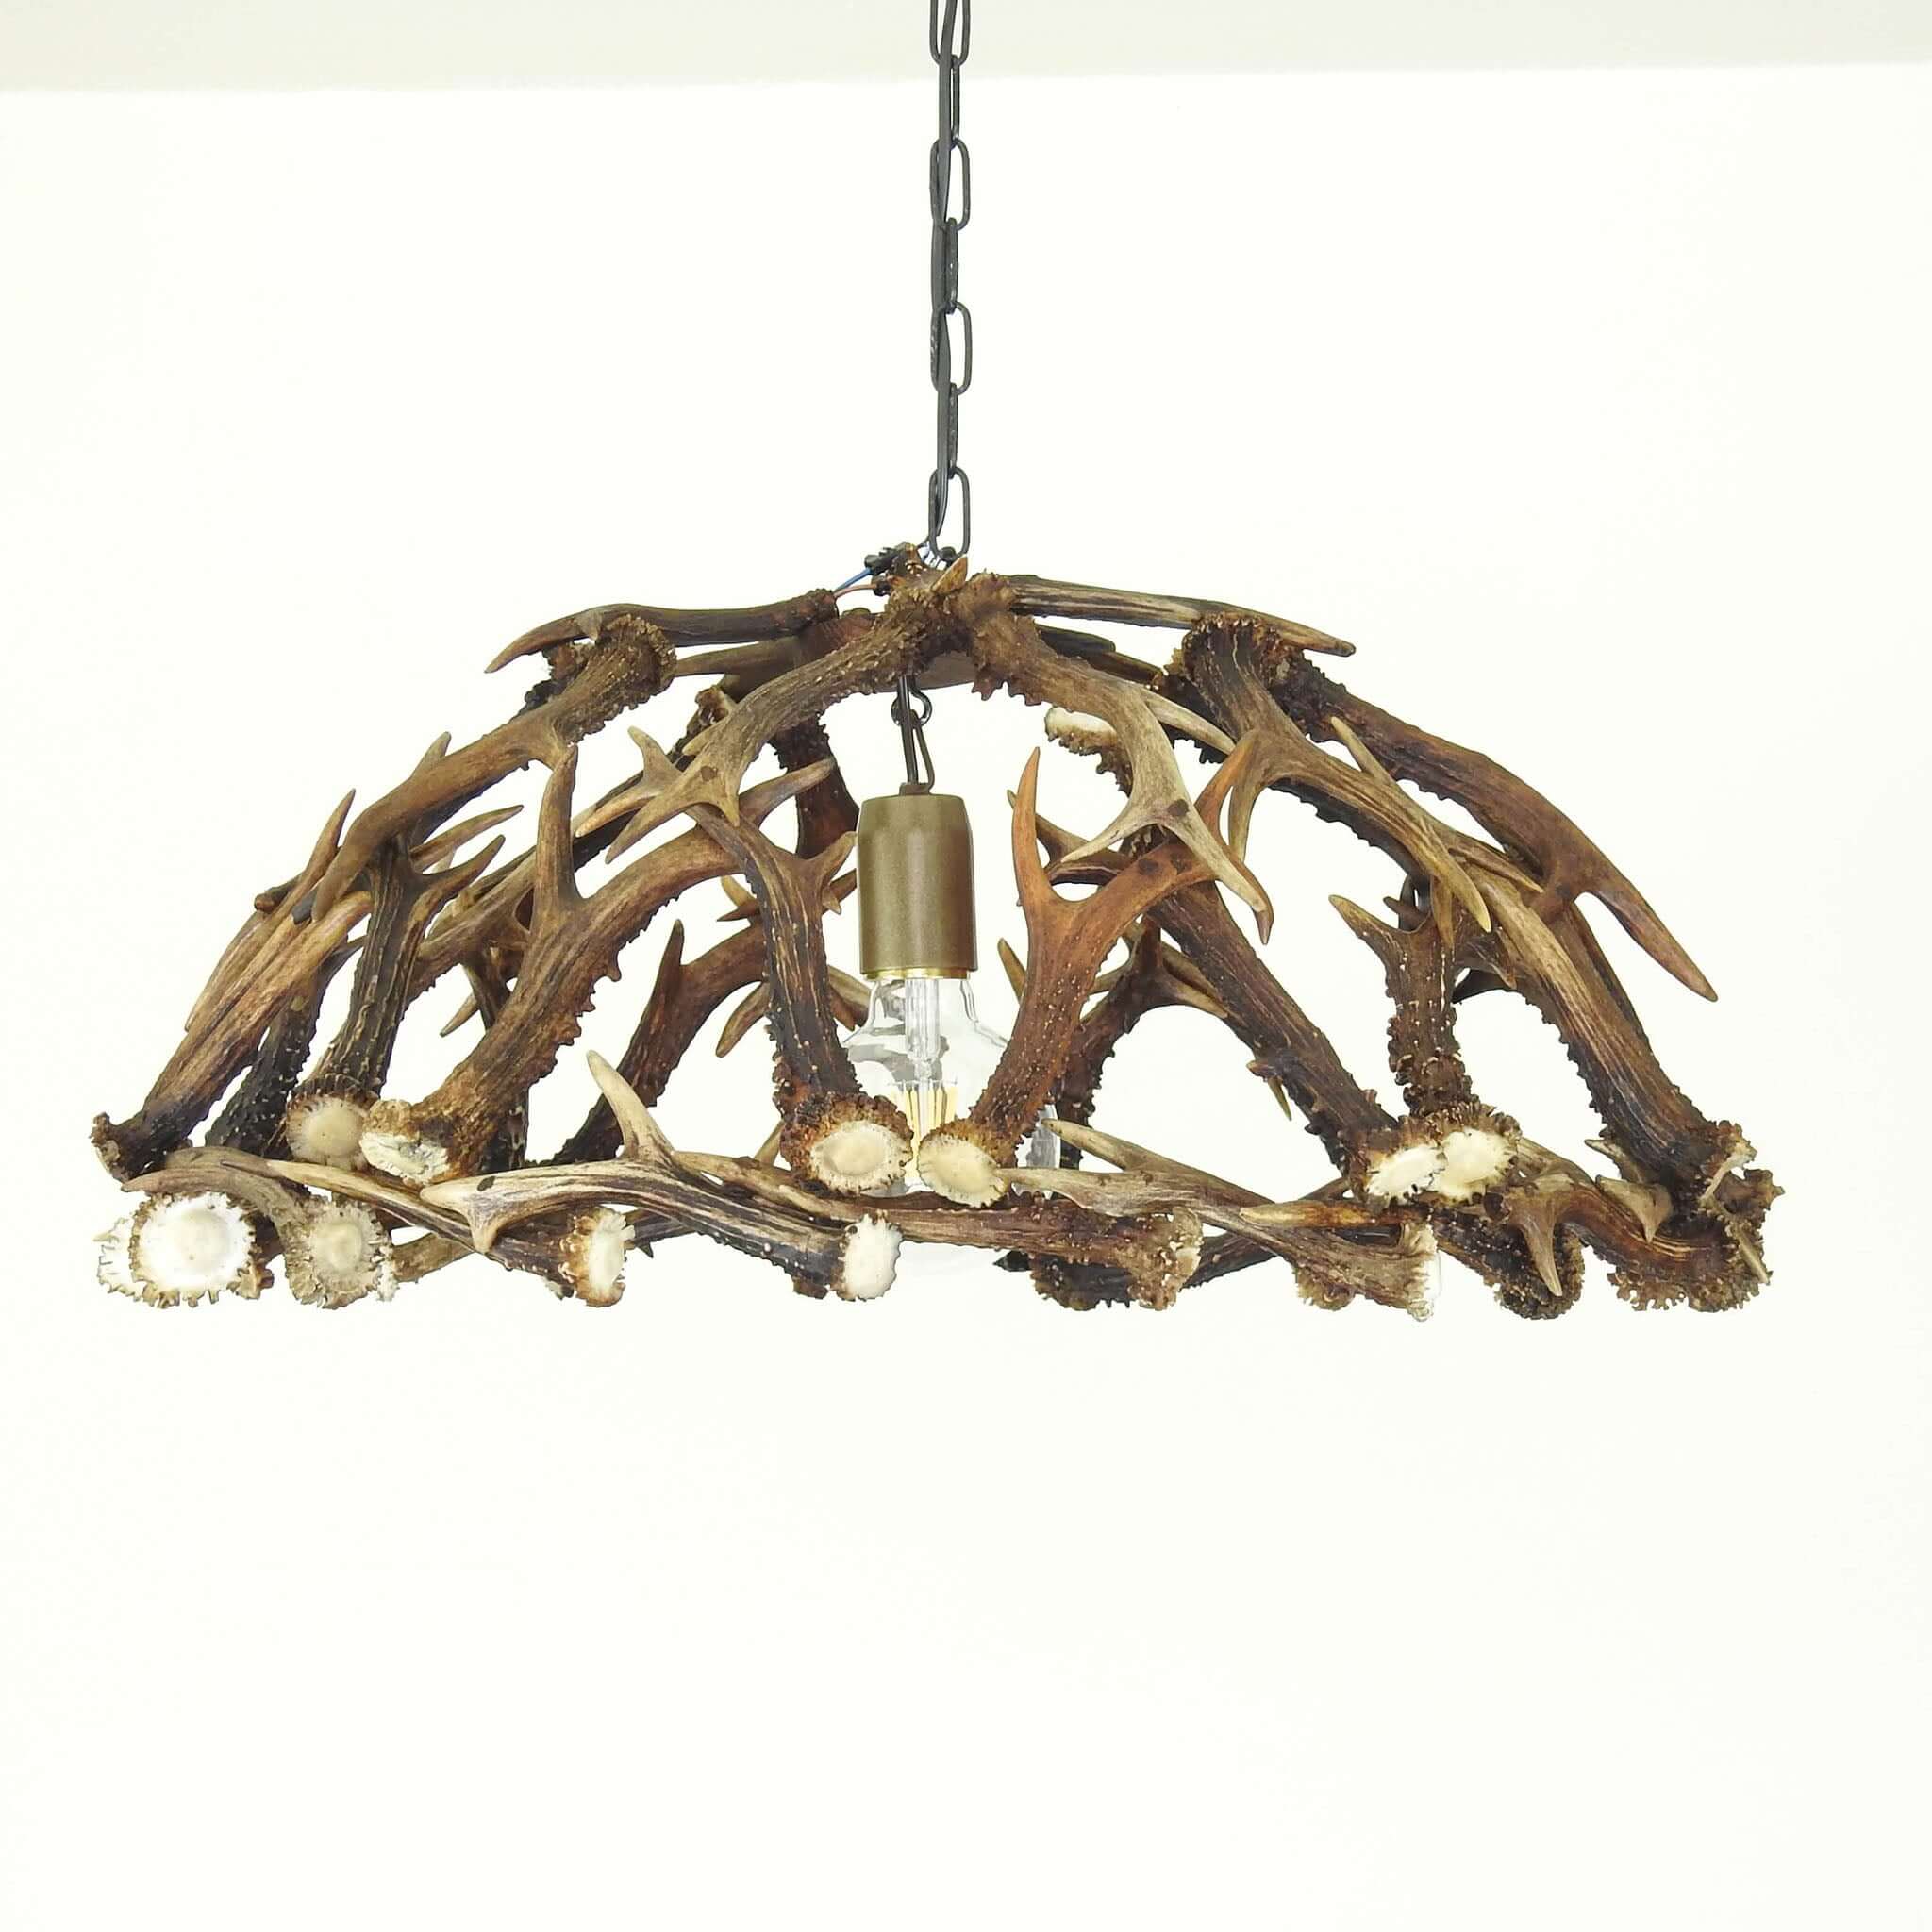 Real antler lamp for hanging over table.